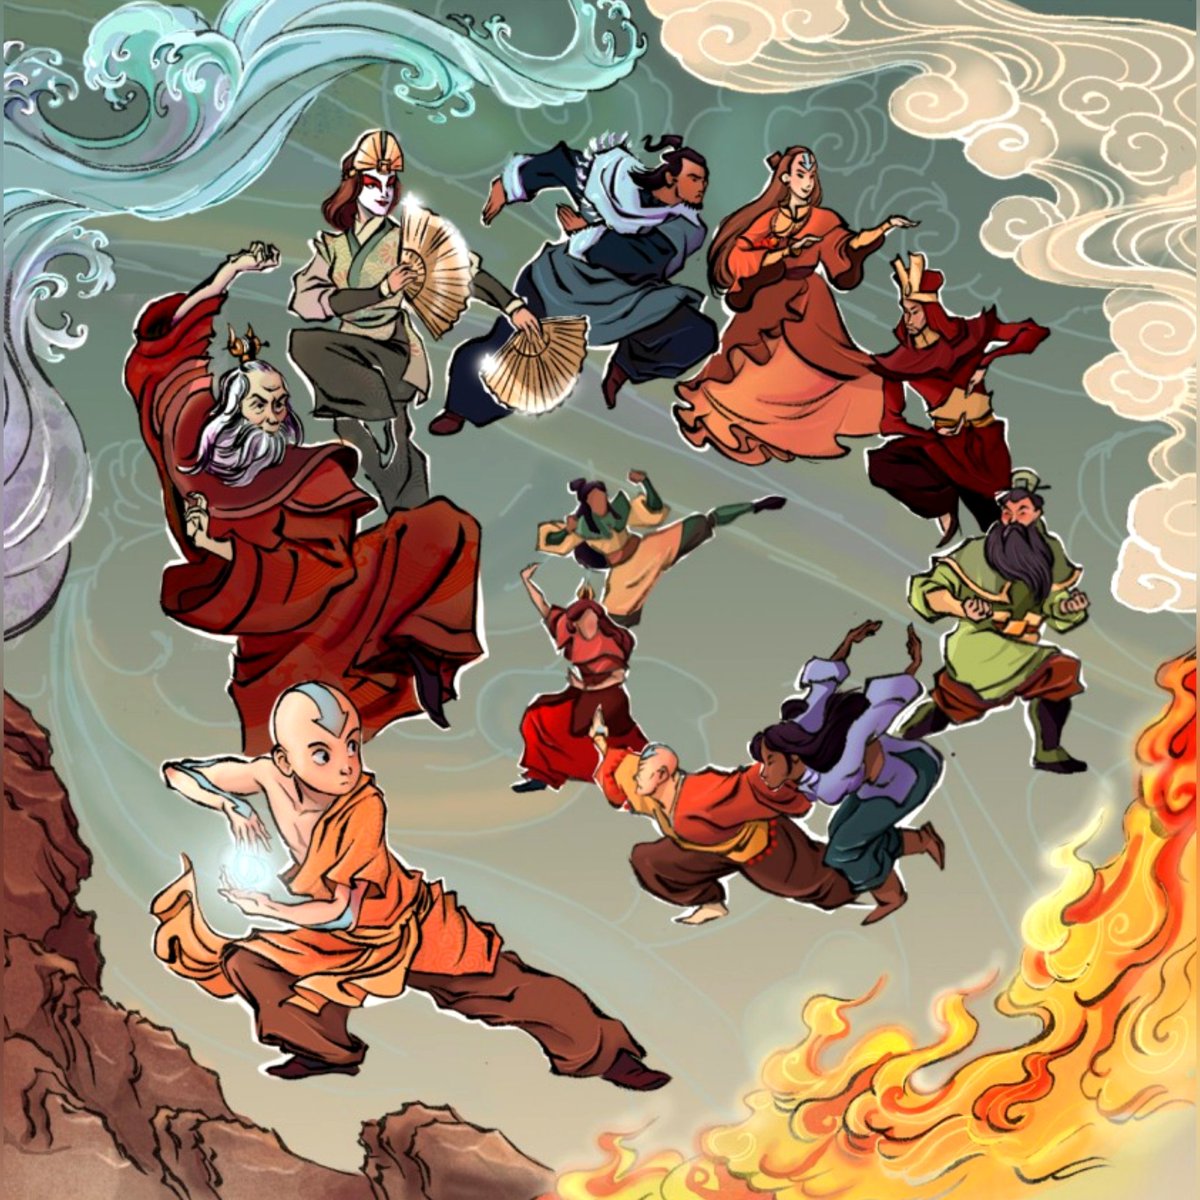 A cycle of past avatars leading up to Aang